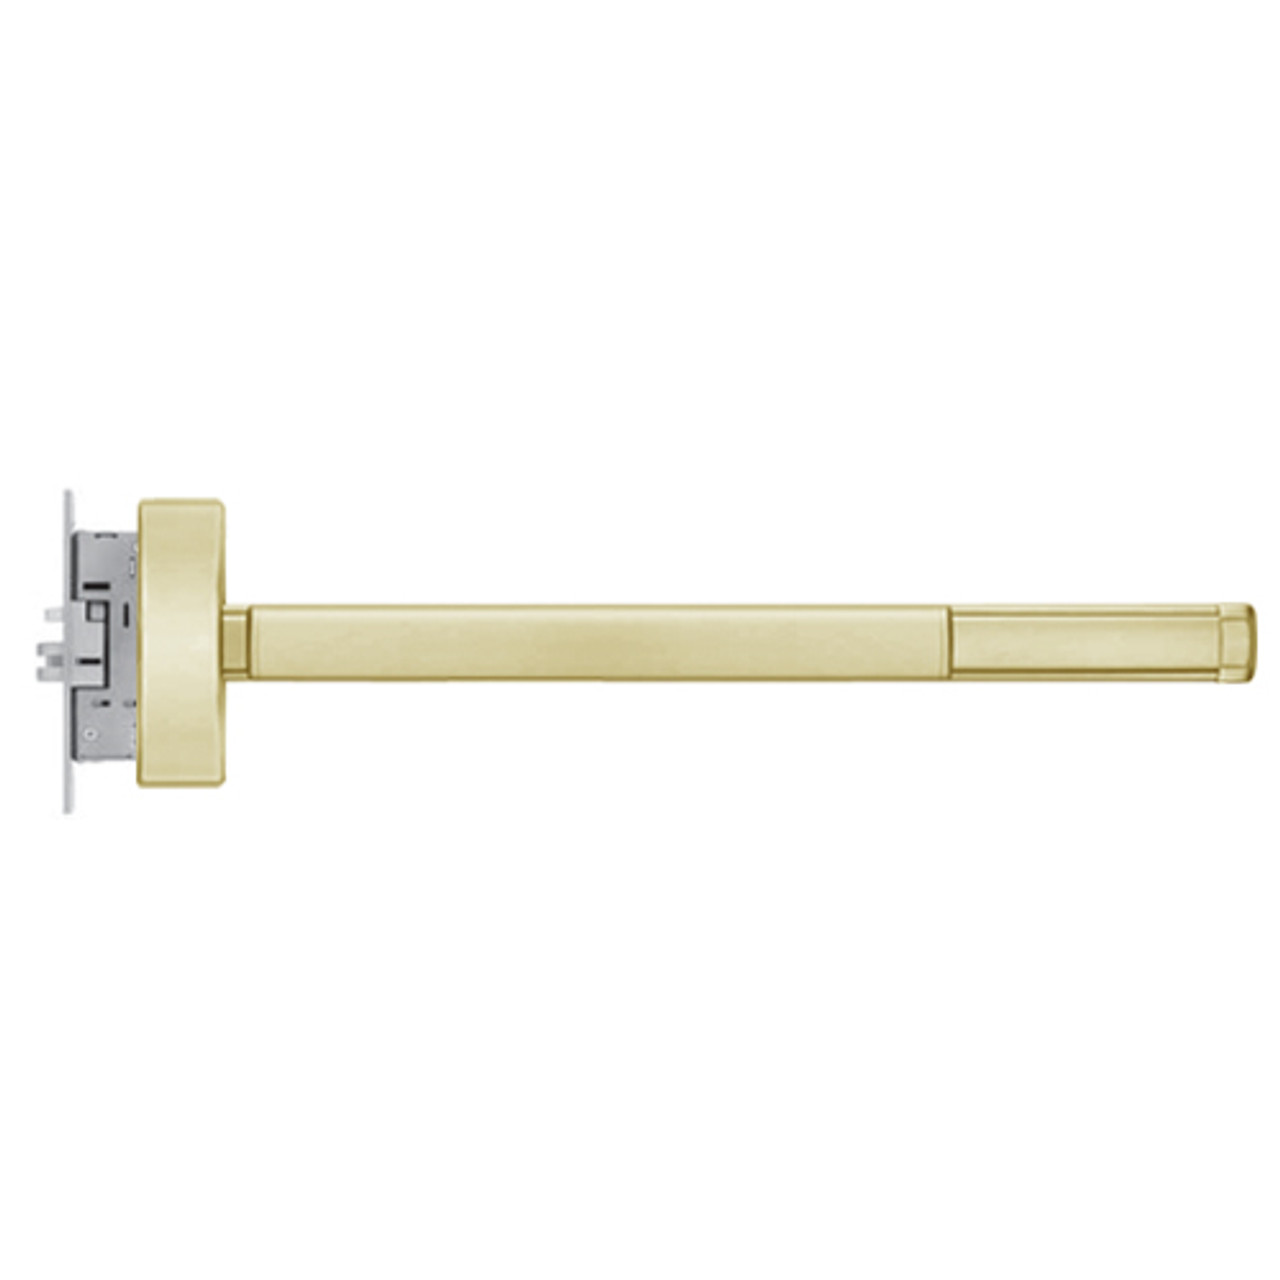 TS2315-RHR-606-36 PHI 2300 Series Apex Mortise Exit Device with Touchbar Monitoring Switch Prepped for Thumb Piece Always Active in Satin Brass Finish